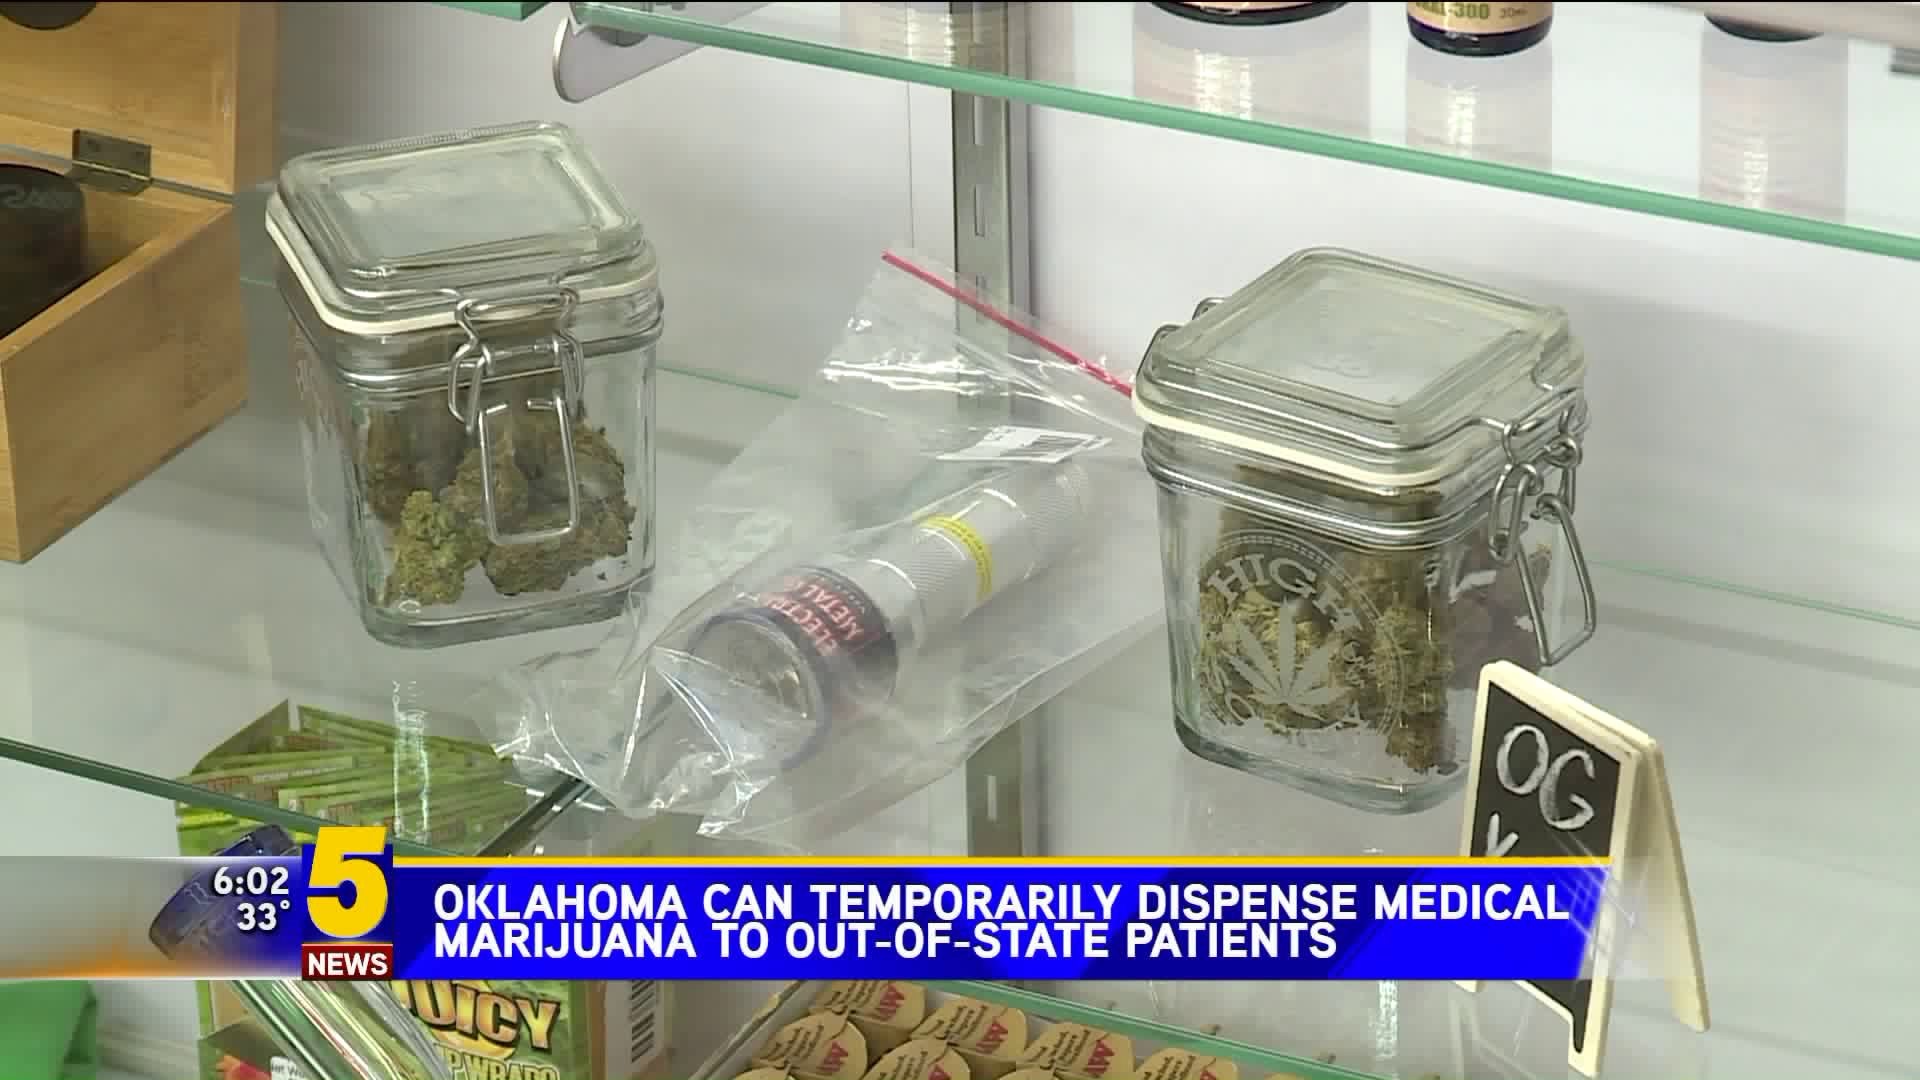 Oklahoma Medical Marijuana Dispensaries Can Accept Out-Of-State Patients